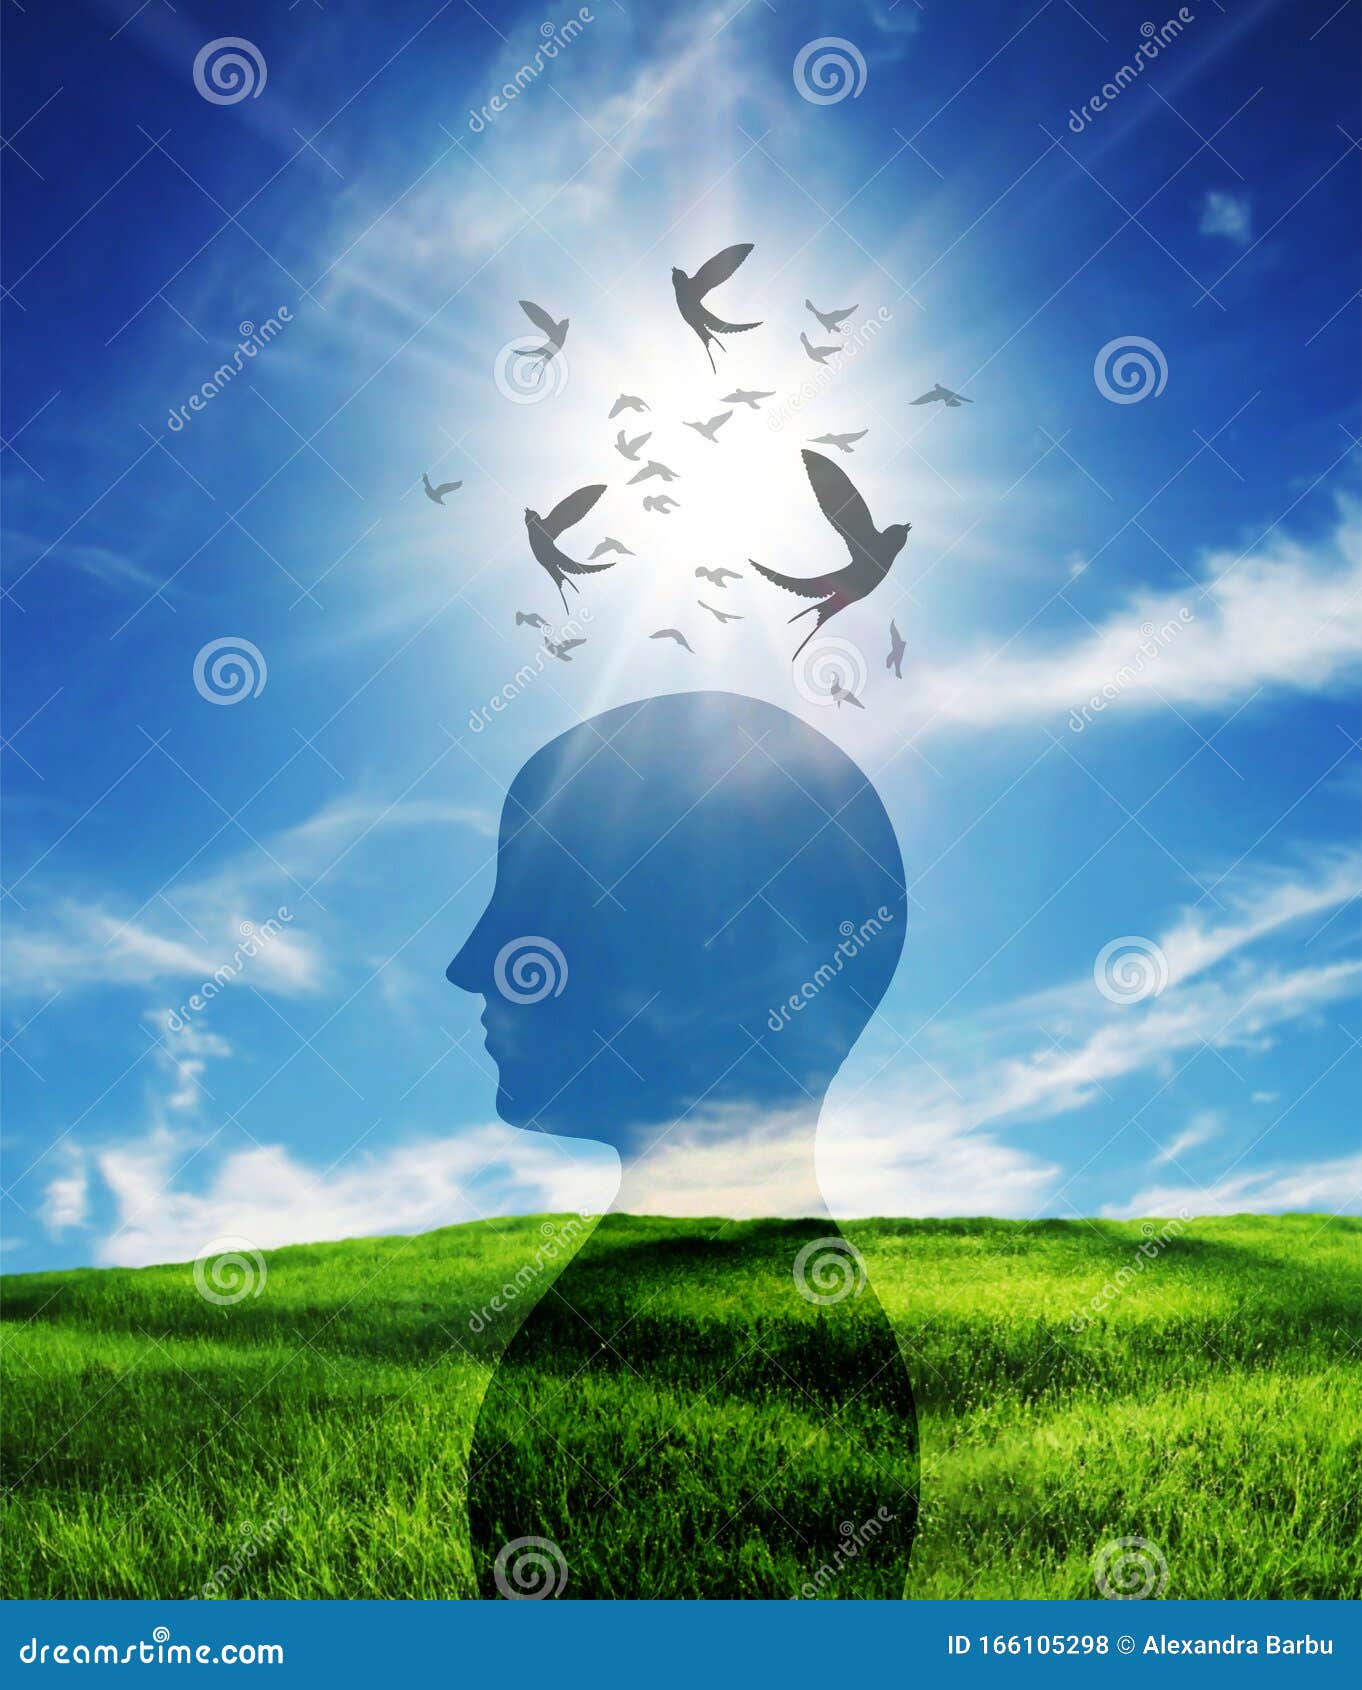 Vejhus Hurtigt Sammentræf Free Thinking, Nourish Your Mind, Positive Thoughts and Good Intentions,  Brain Power Concept Stock Photo - Image of freedom, equilibrium: 166105298